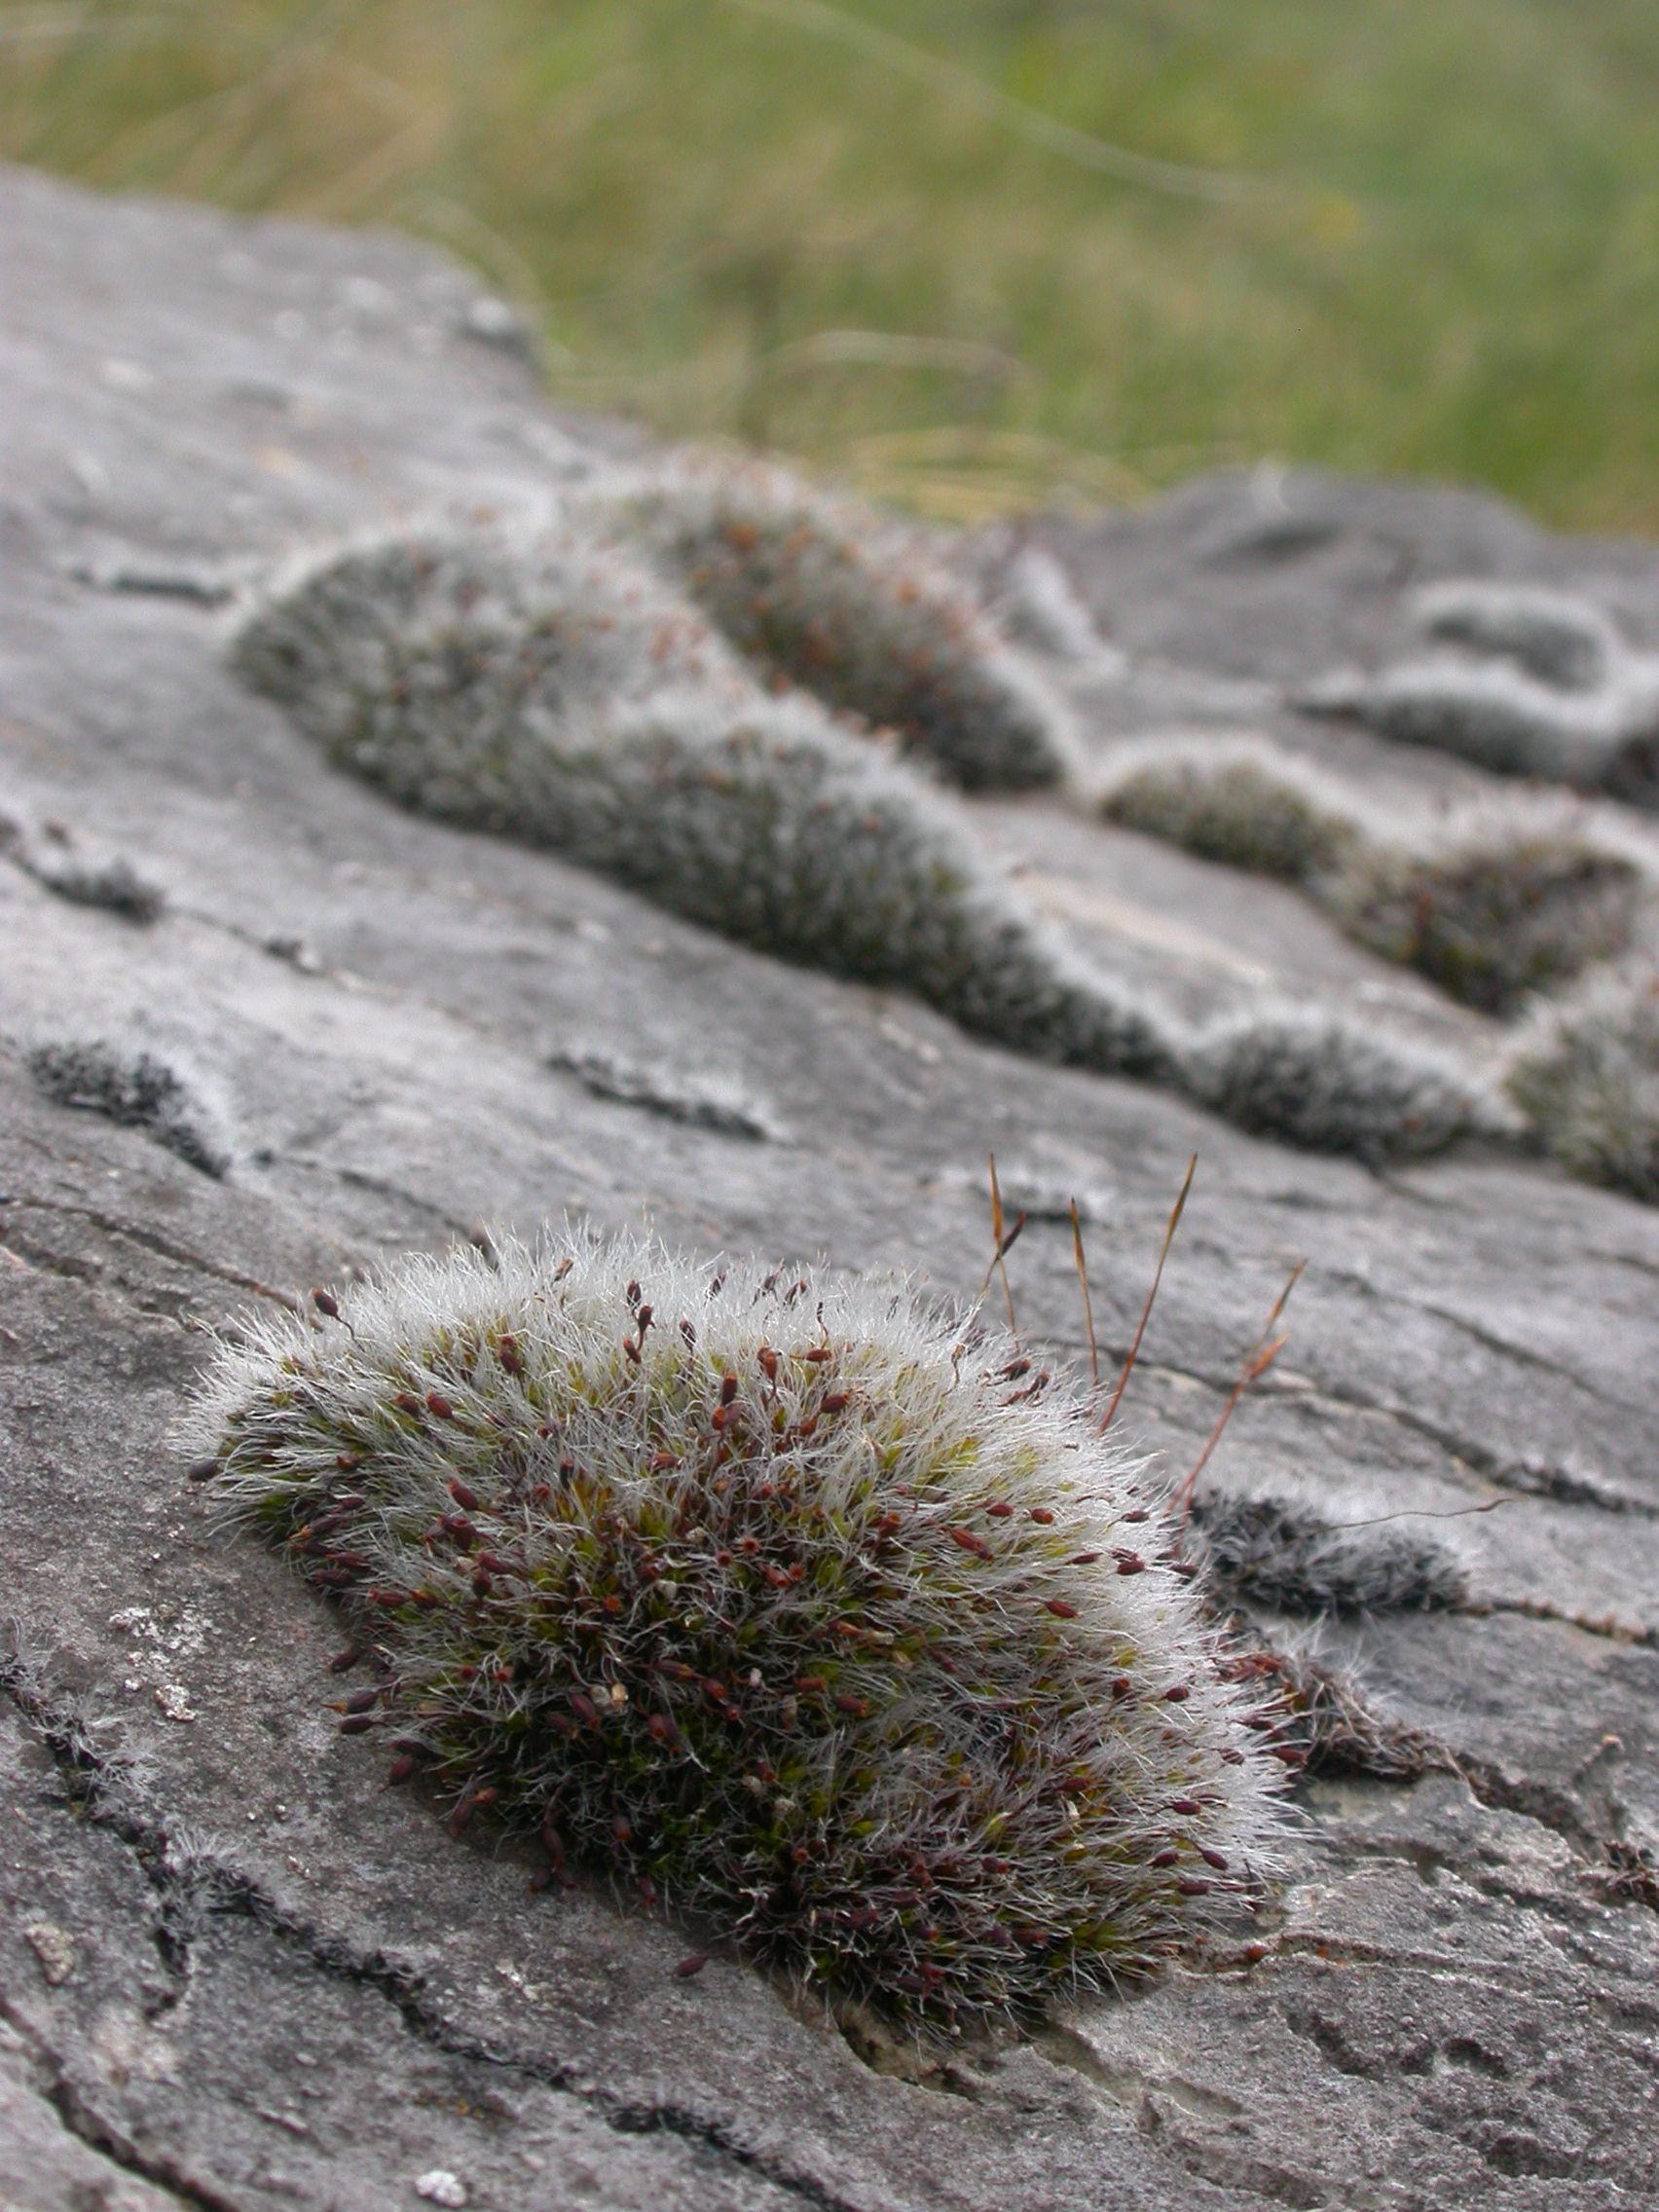 Grey-cushioned Grimmia moss (<em>Grimmia pulvinata</em>) with white hair points, seen here on a rock face on the Great Orme in North Wales. <em>© Kath Slade</em>